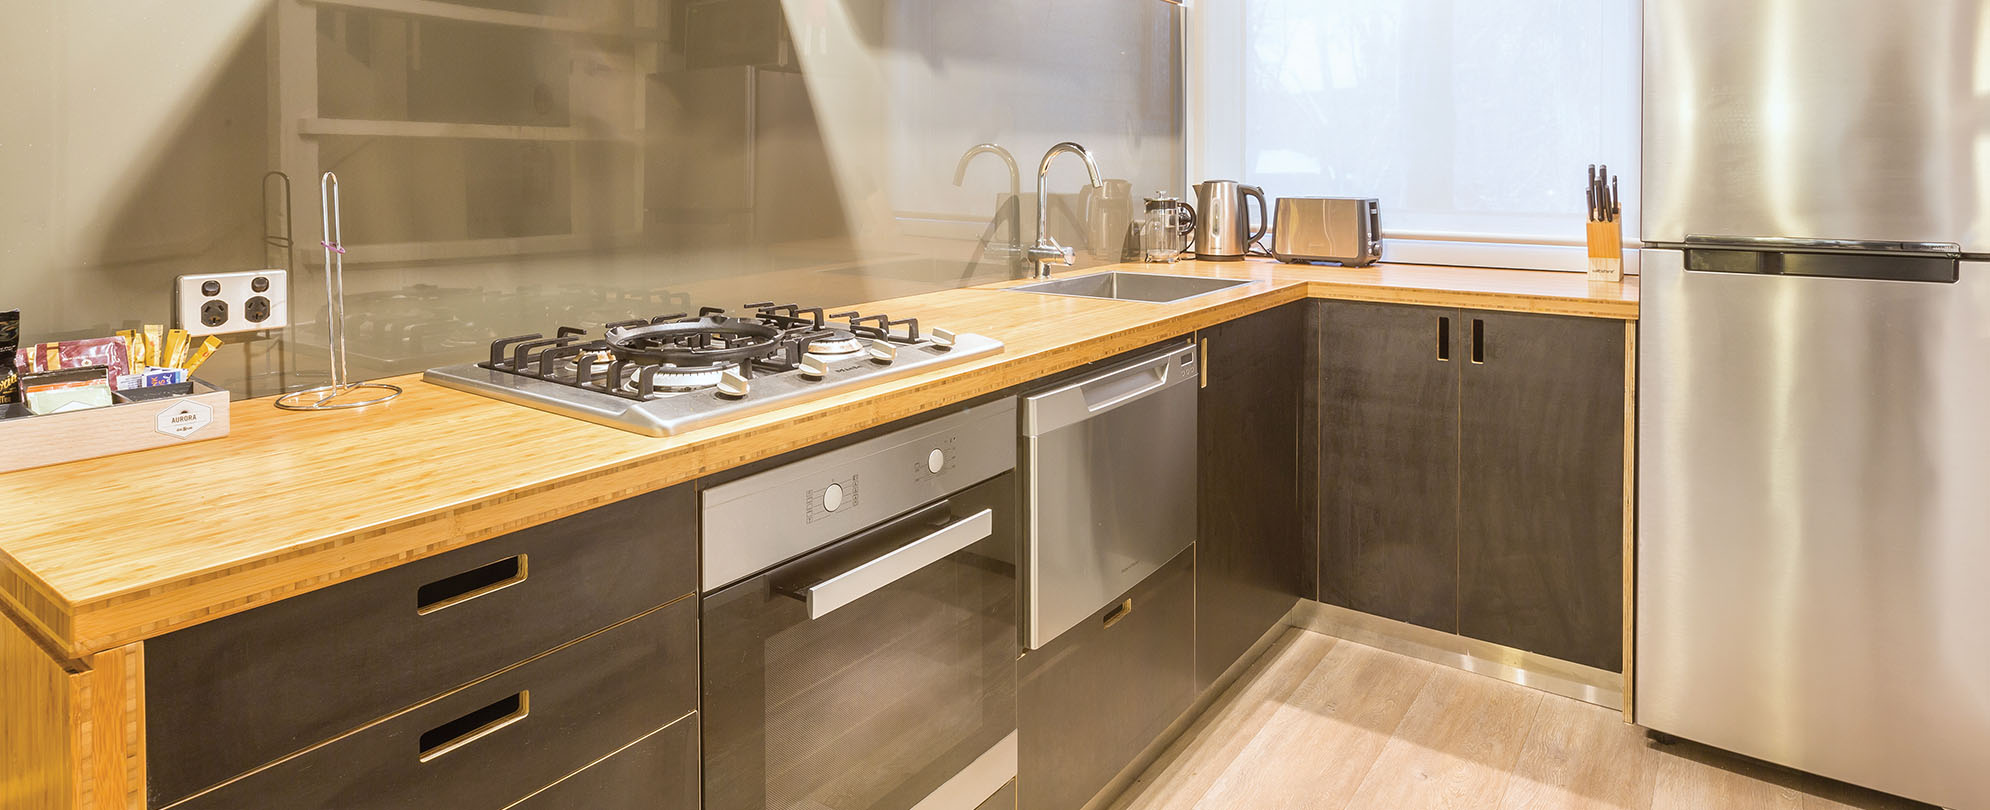 A kitchen with stainless steel appliances and wood countertops inside a 1-bedroom deluxe suite at Club Wyndham Dinner Plain Mt. Hotham resort. 